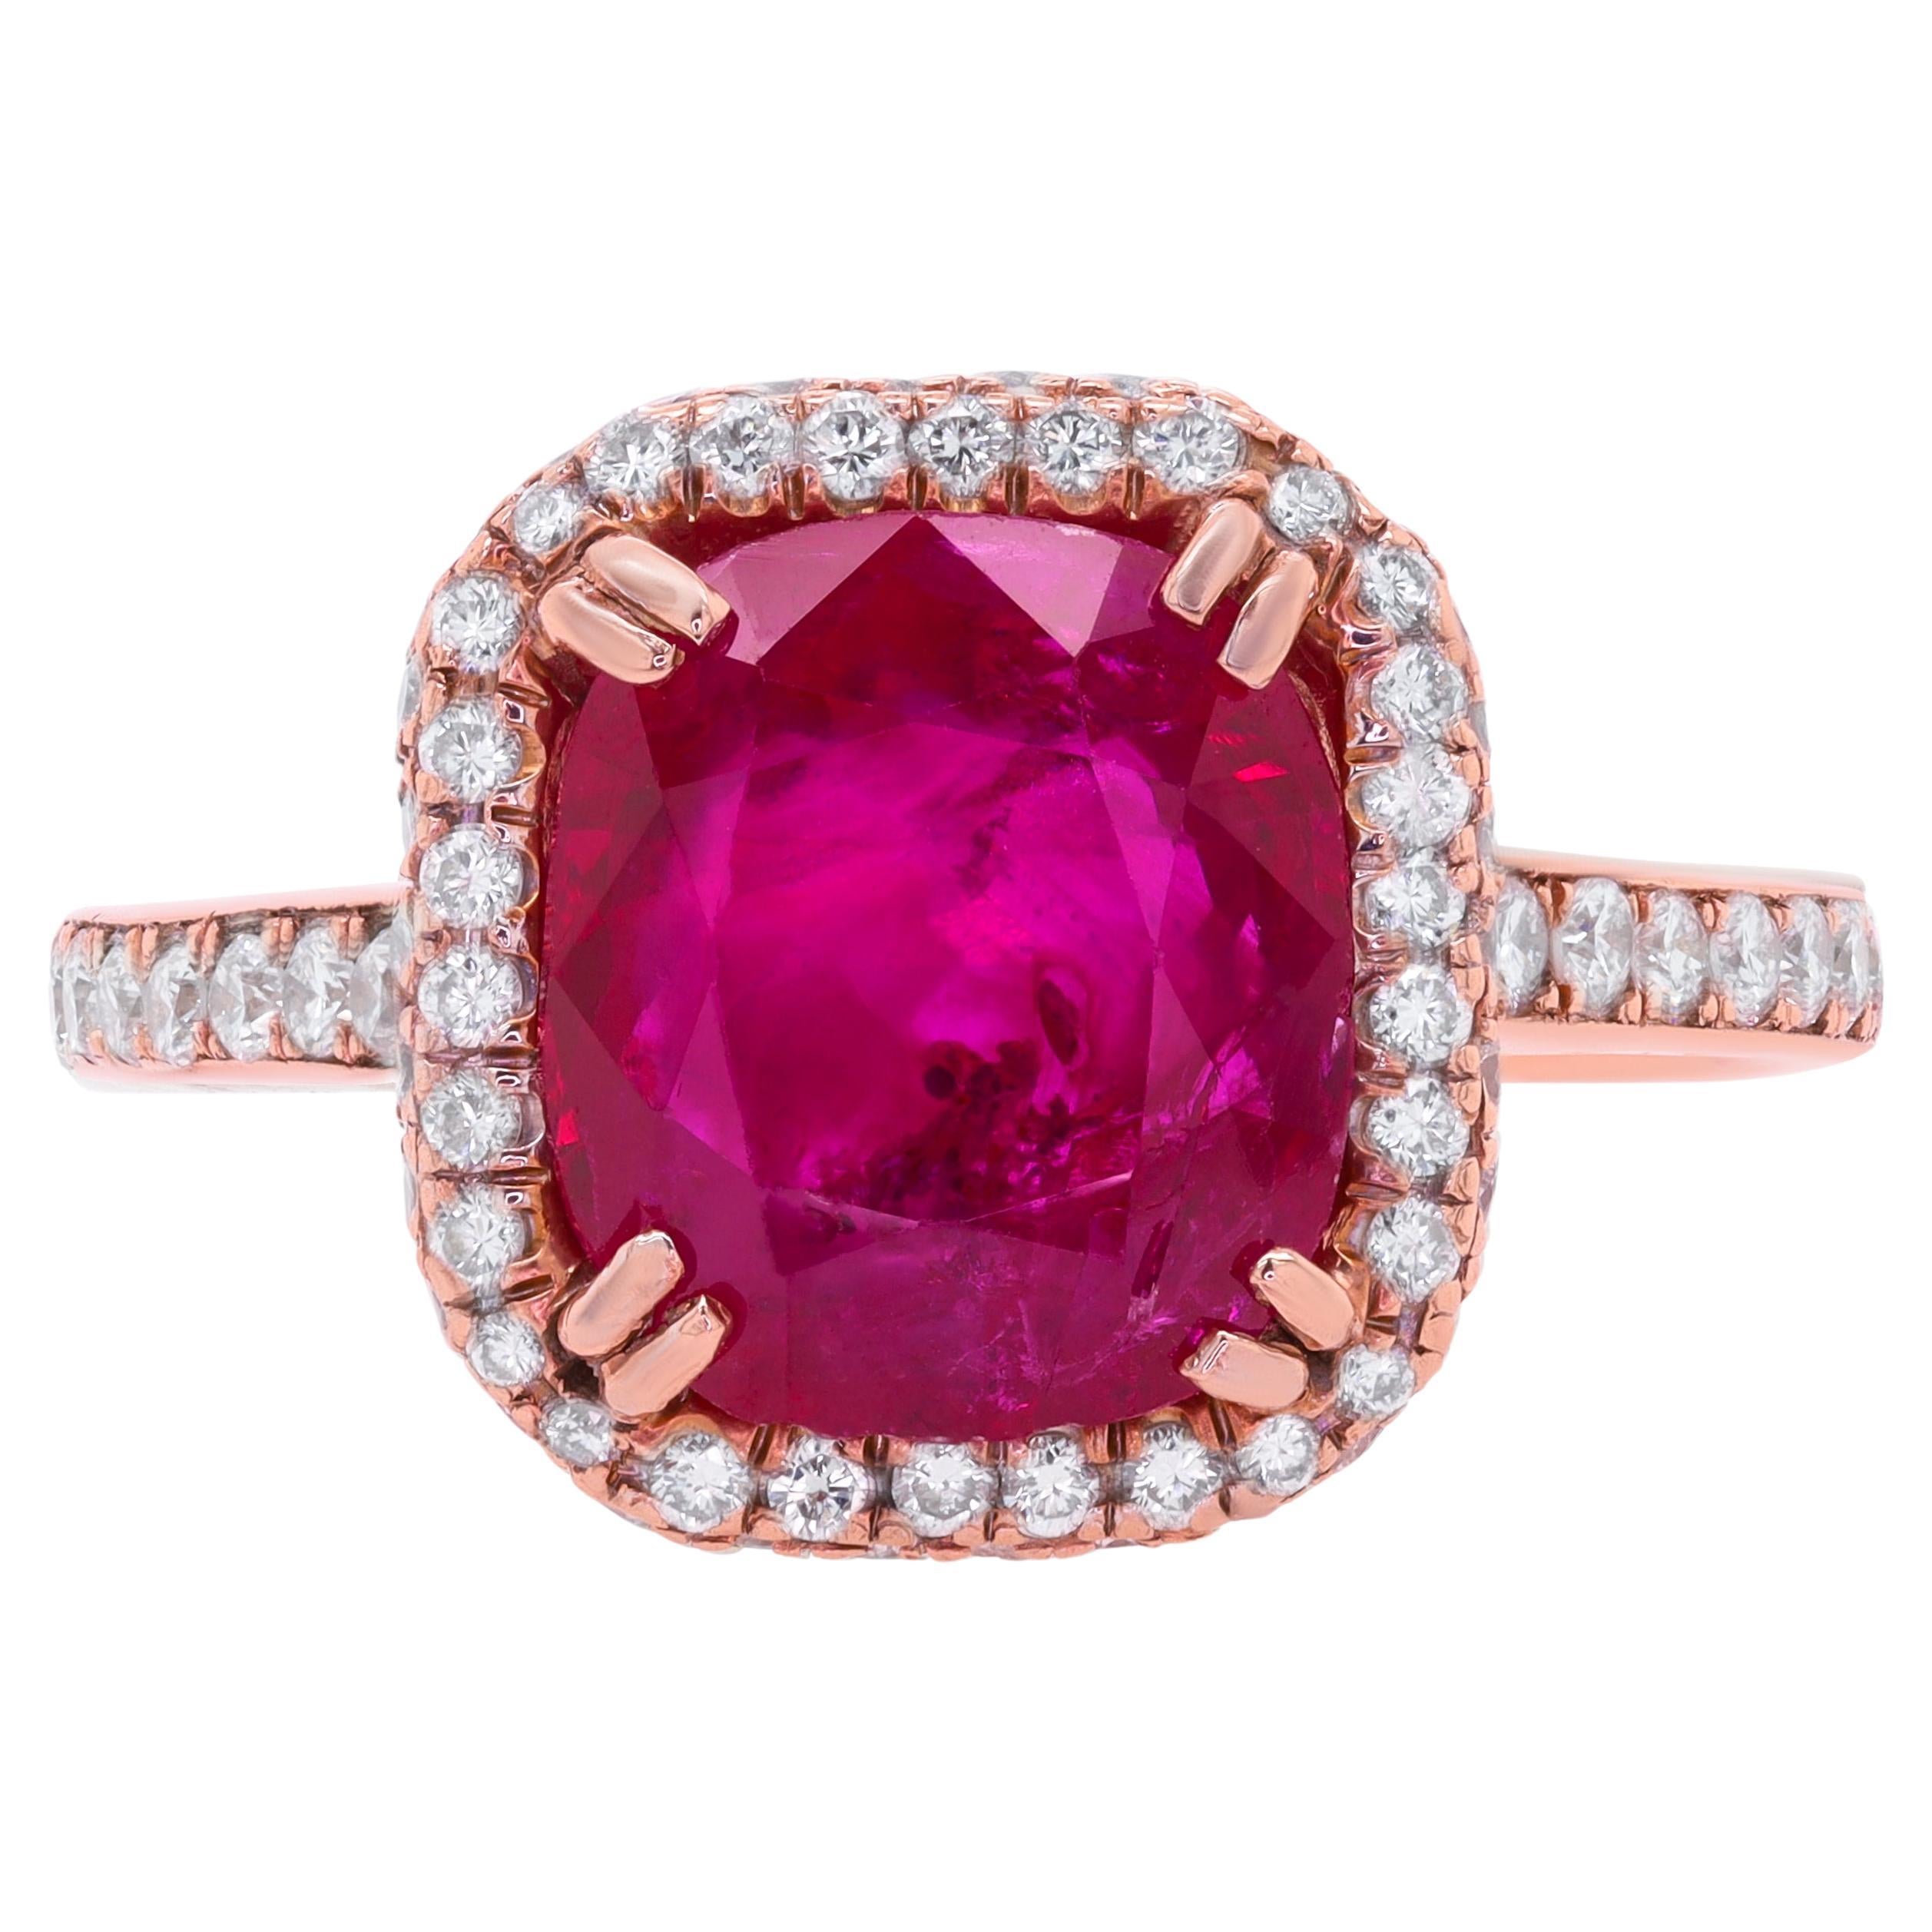 Diana M. 14 kt rose gold ruby and diamond ring featuring a 3.14 ct  For Sale